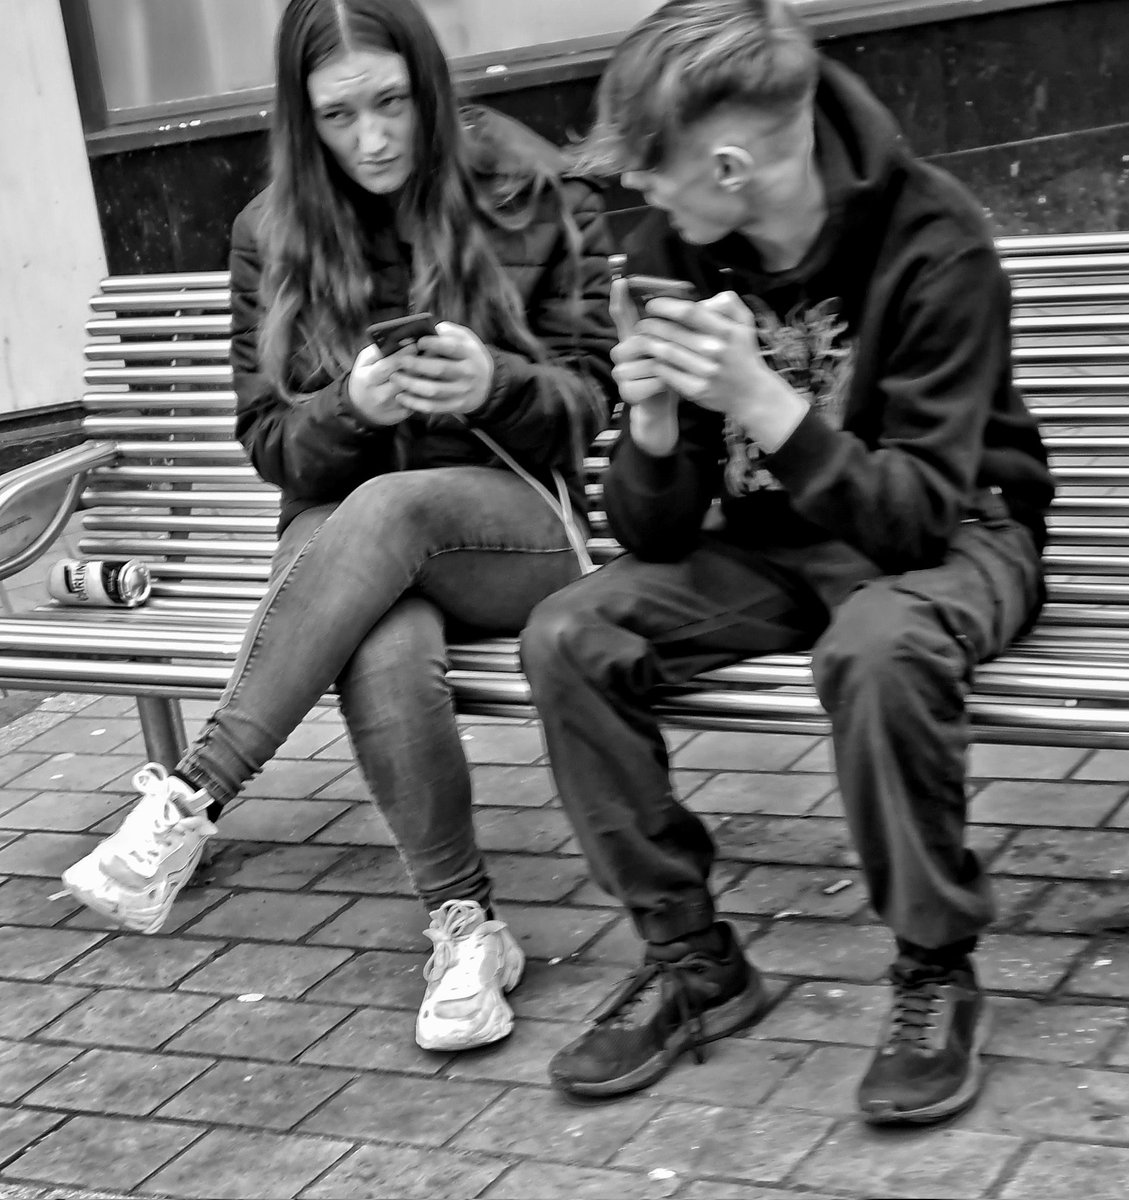 The human equivalent of a couple of squirrels grasping their nuts. #phone #social media #bnw #streetphoto #streetphotography